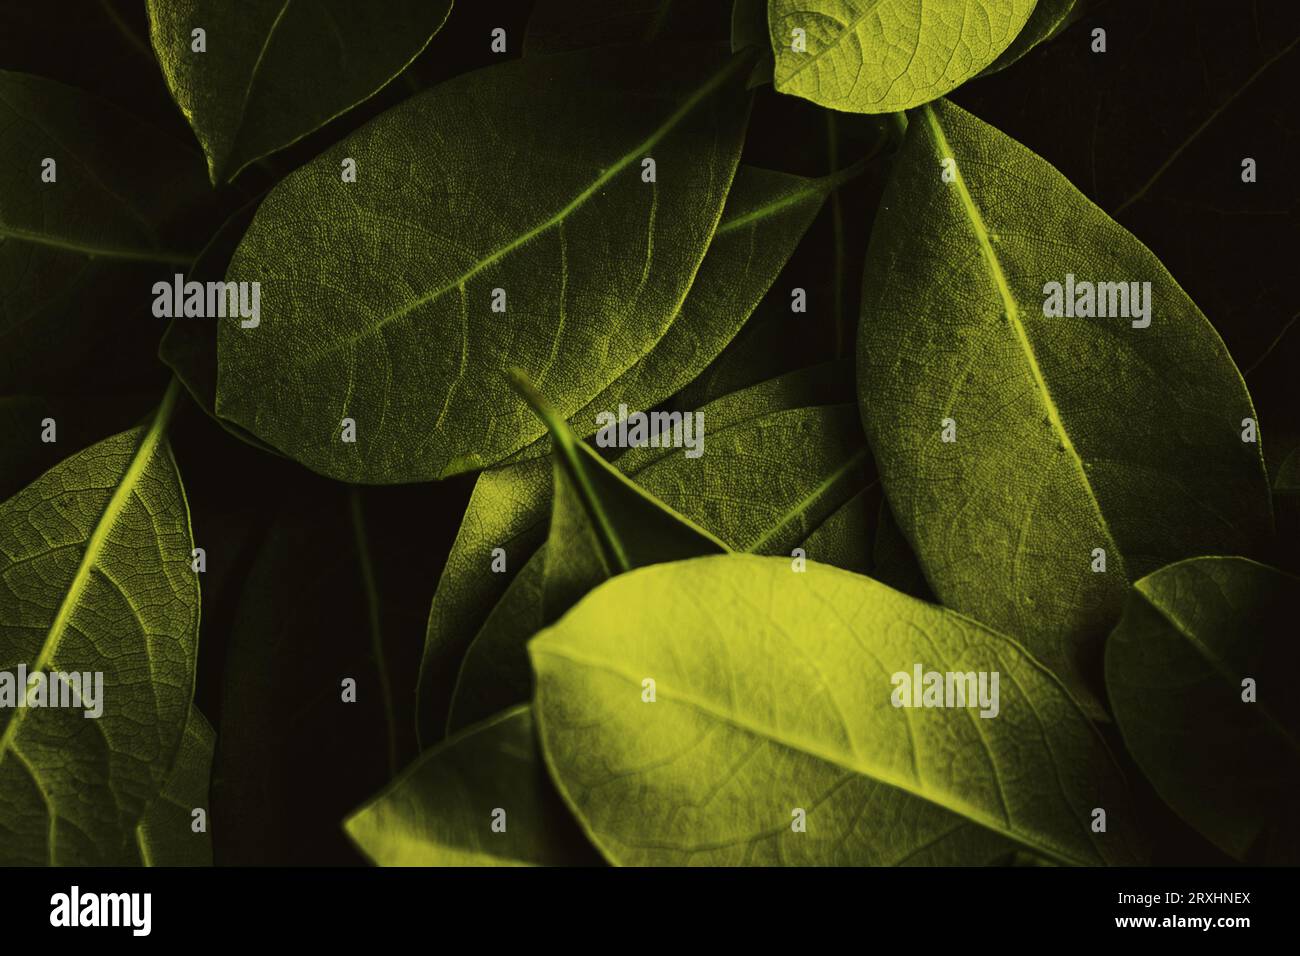 Close up of leaves. Daphne leaves background high angle view. Selective focus included Stock Photo